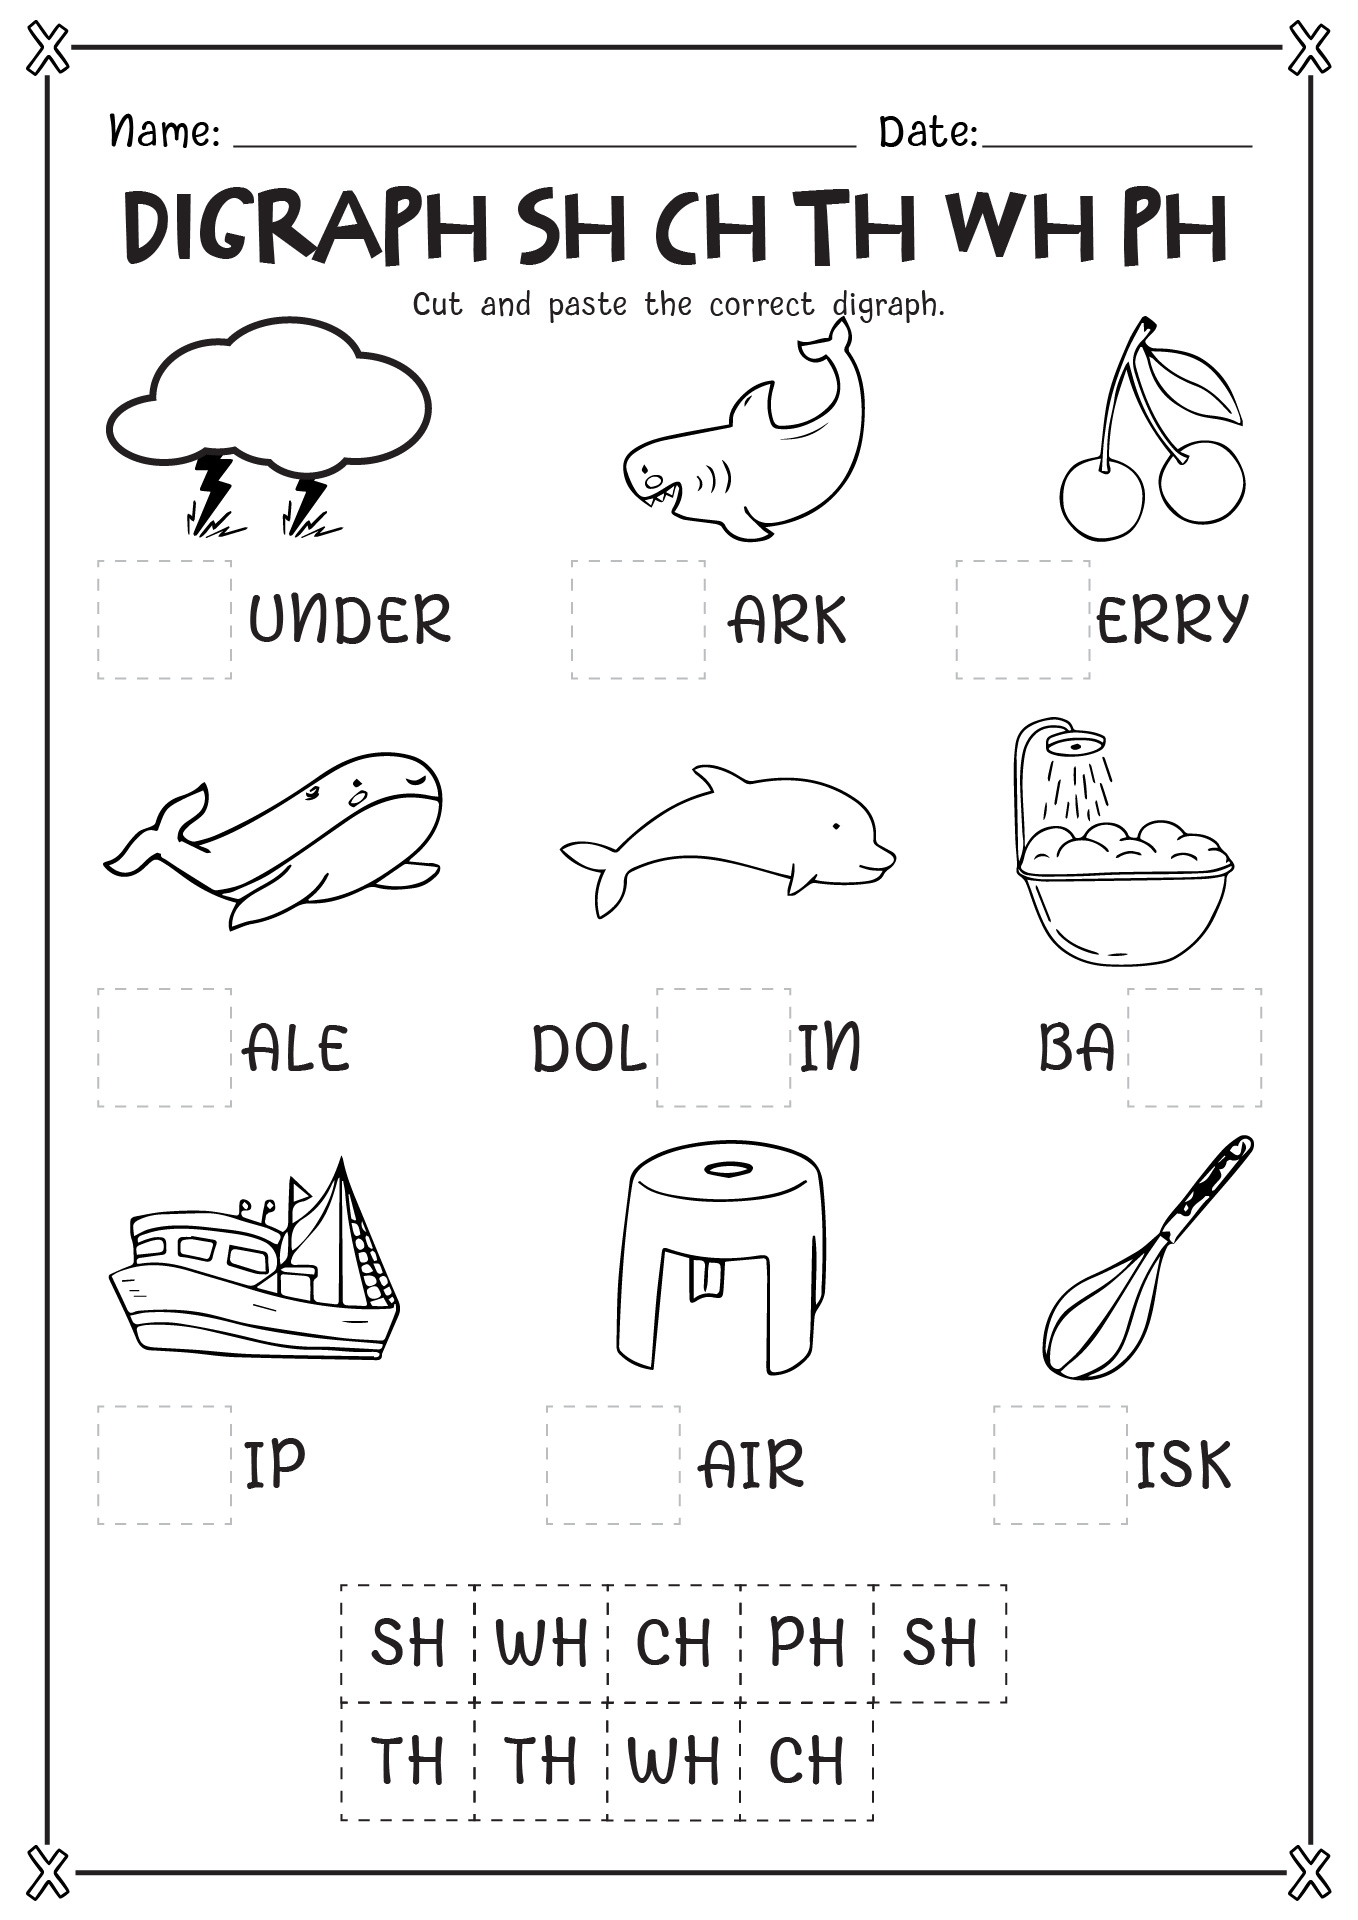 Digraph Sh CH Th Wh Ph Worksheets Image